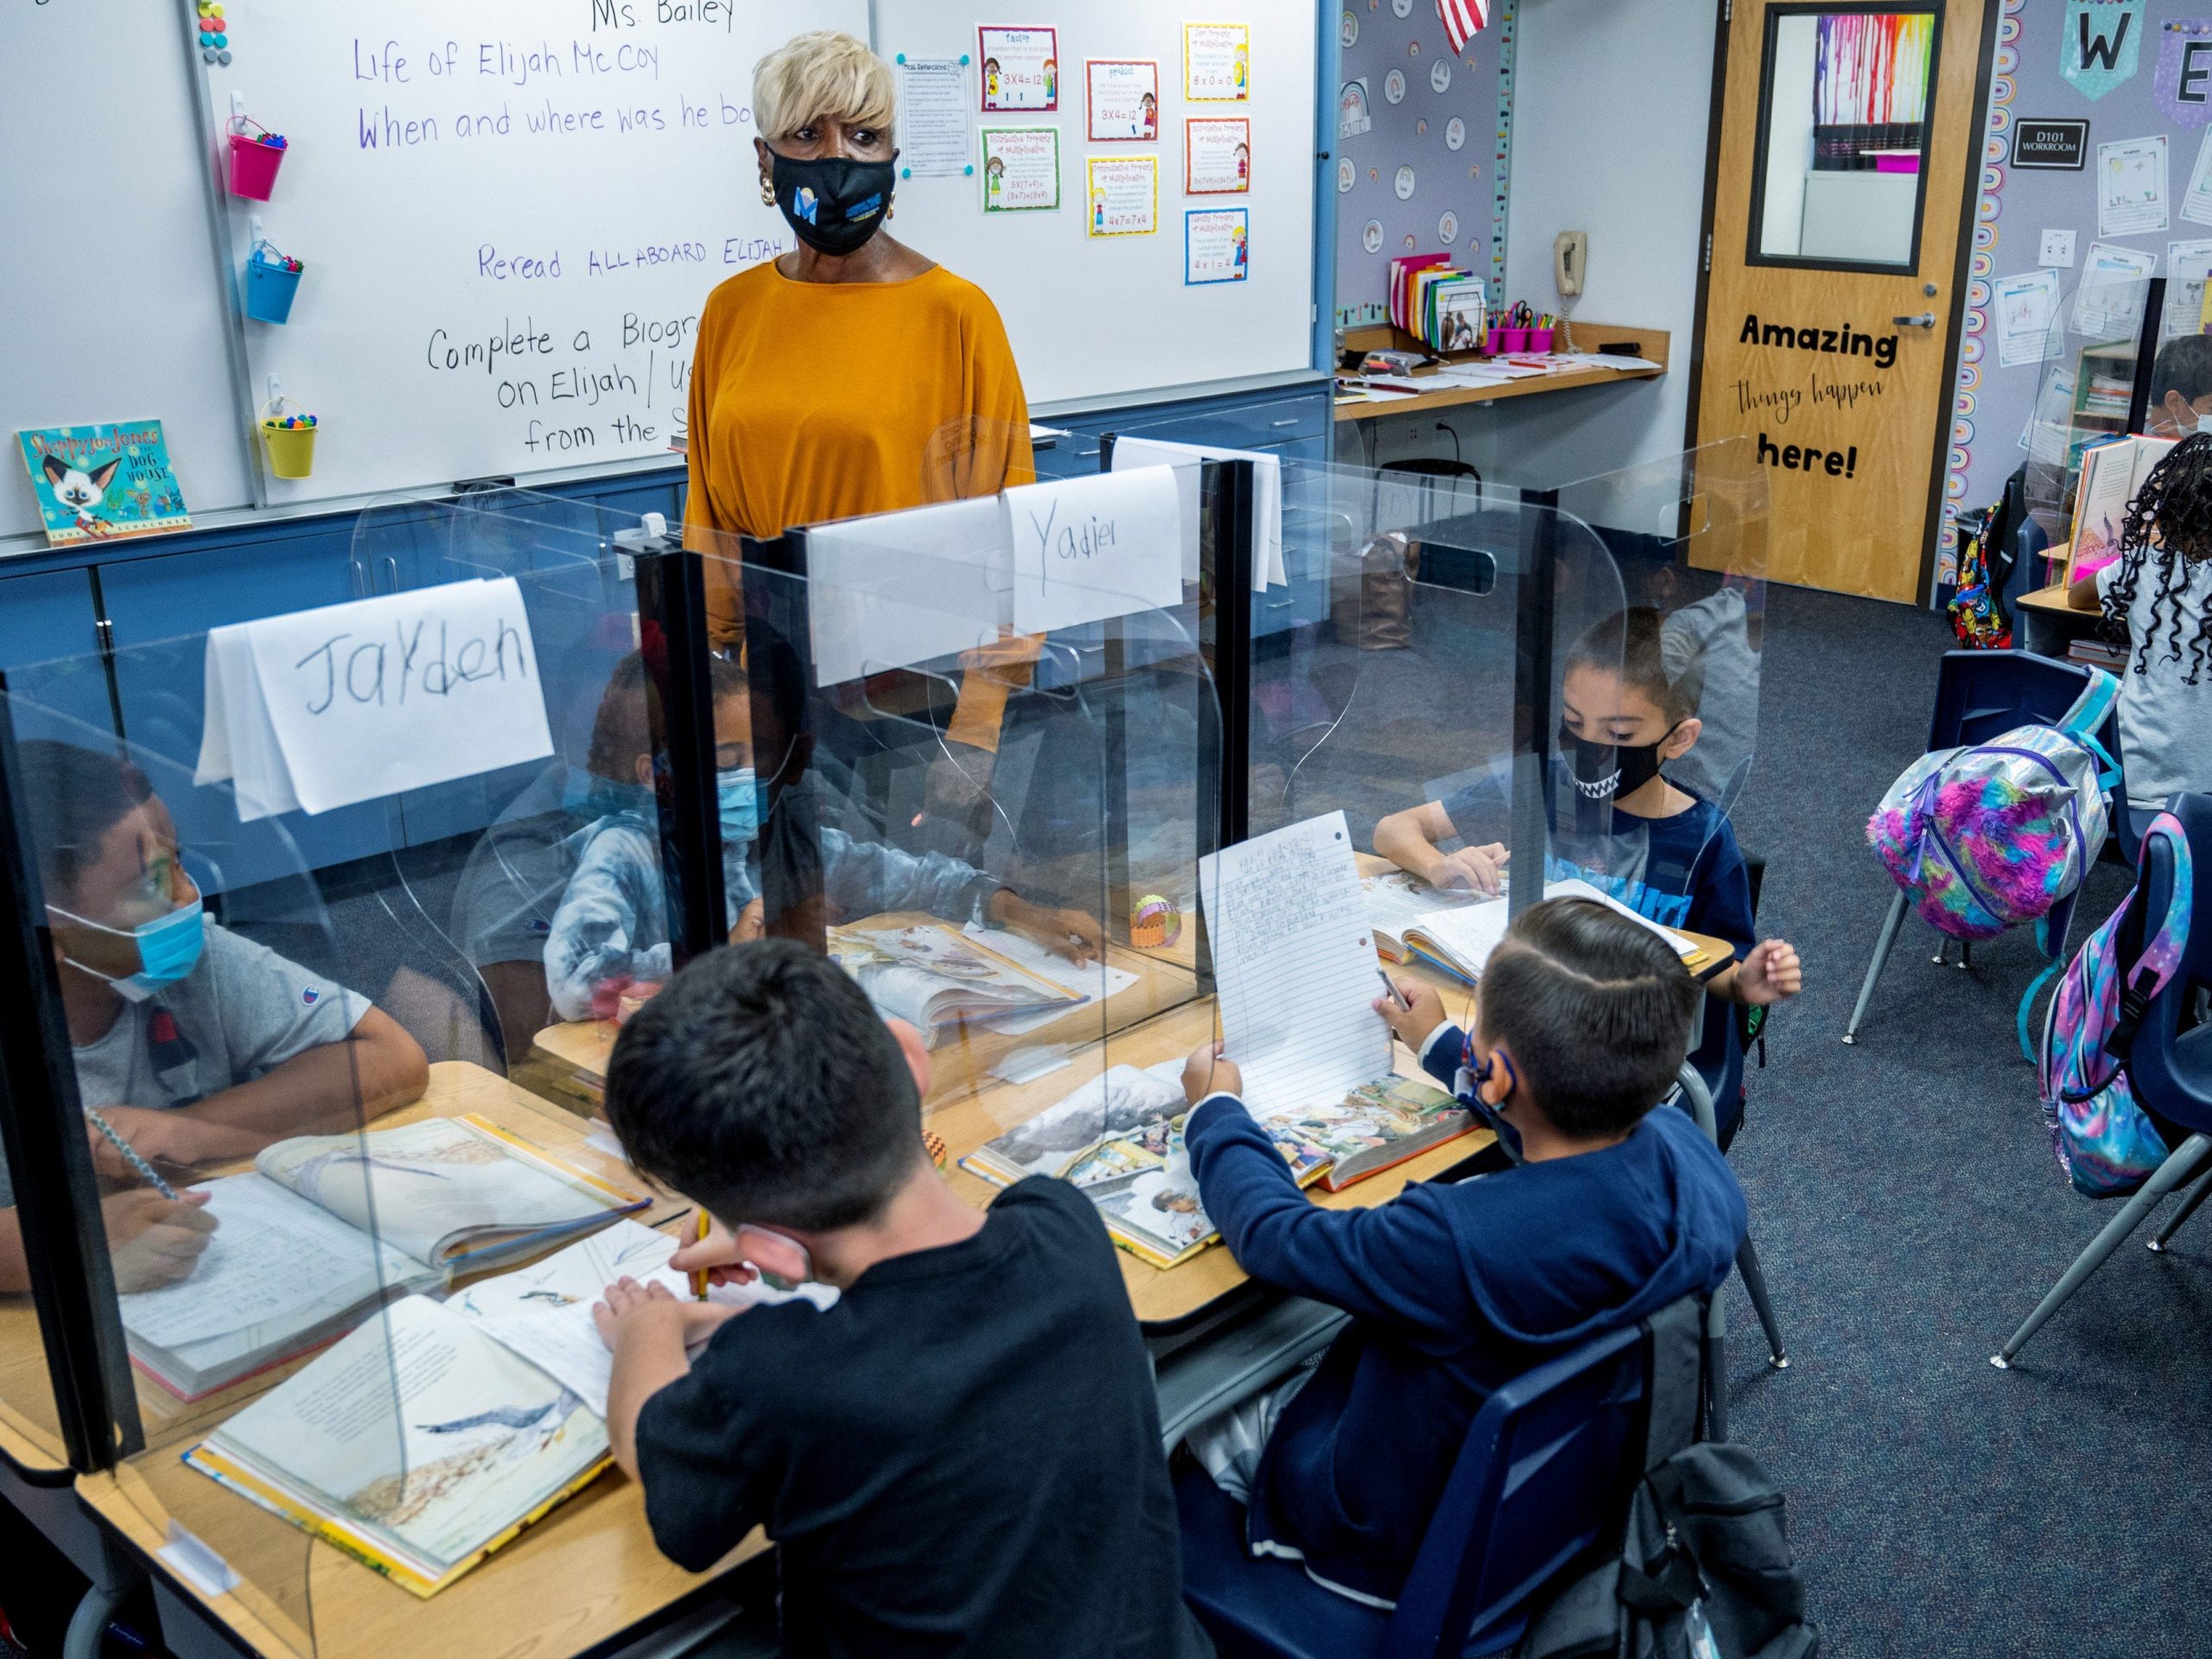 La Jolla Elementary School substitute teacher Dorothy Bailey speaks to her students during class in Moreno Valley on Thursday, September 23, 2021.